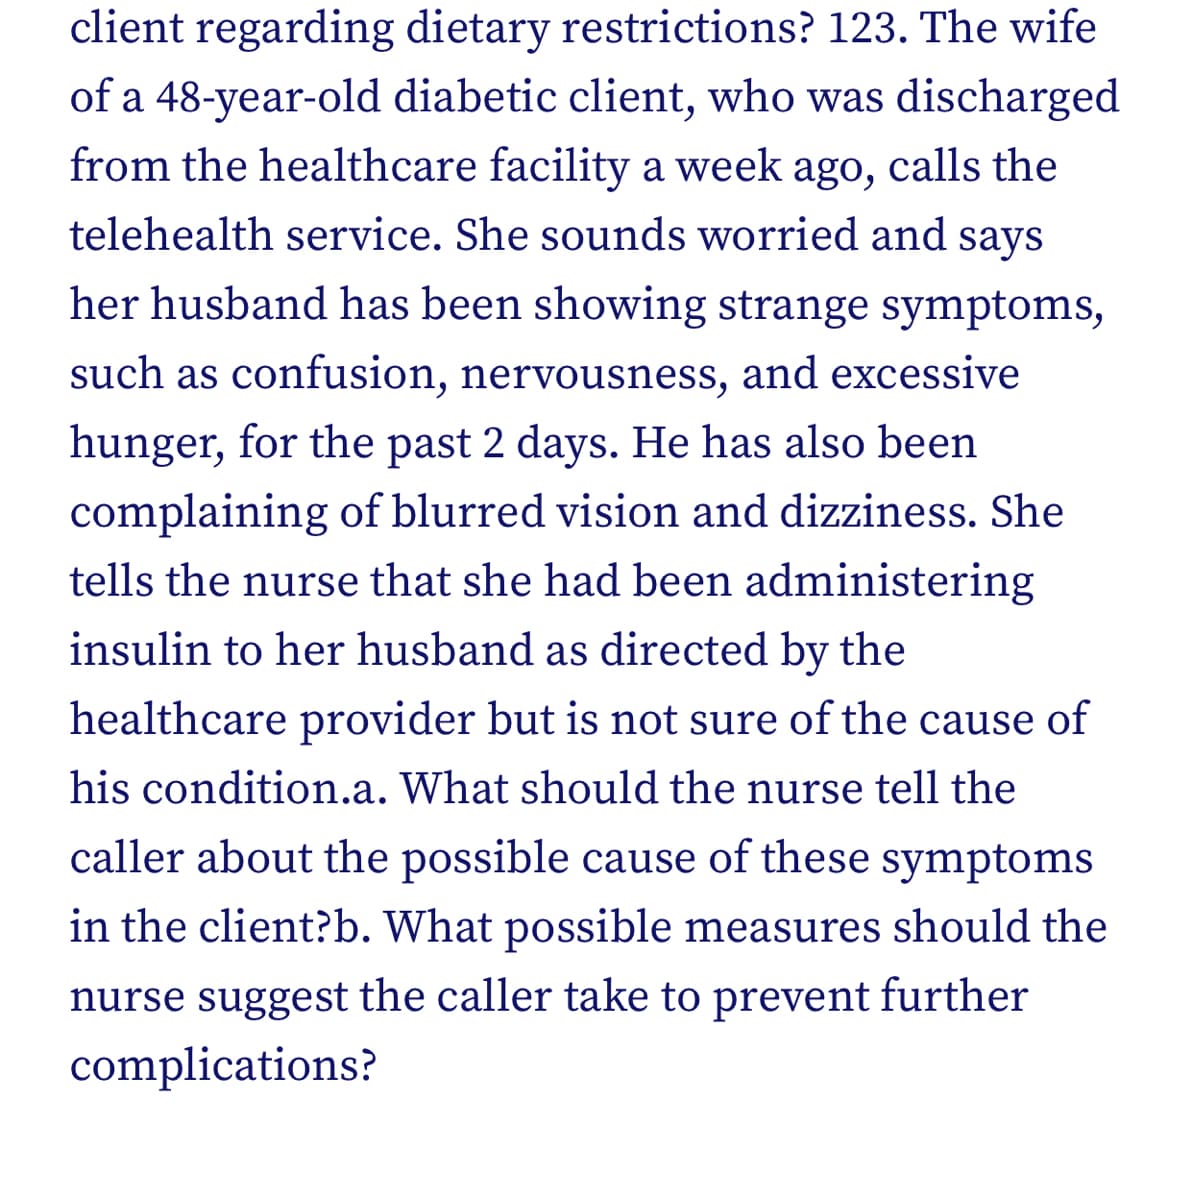 client regarding dietary restrictions? 123. The wife
of a 48-year-old diabetic client, who was discharged
from the healthcare facility a week ago, calls the
telehealth service. She sounds worried and says
her husband has been showing strange symptoms,
such as confusion, nervousness, and excessive
hunger, for the past 2 days. He has also been
complaining of blurred vision and dizziness. She
tells the nurse that she had been administering
insulin to her husband as directed by the
healthcare provider but is not sure of the cause of
his condition.a. What should the nurse tell the
caller about the possible cause of these symptoms
in the client?b. What possible measures should the
nurse suggest the caller take to prevent further
complications?
